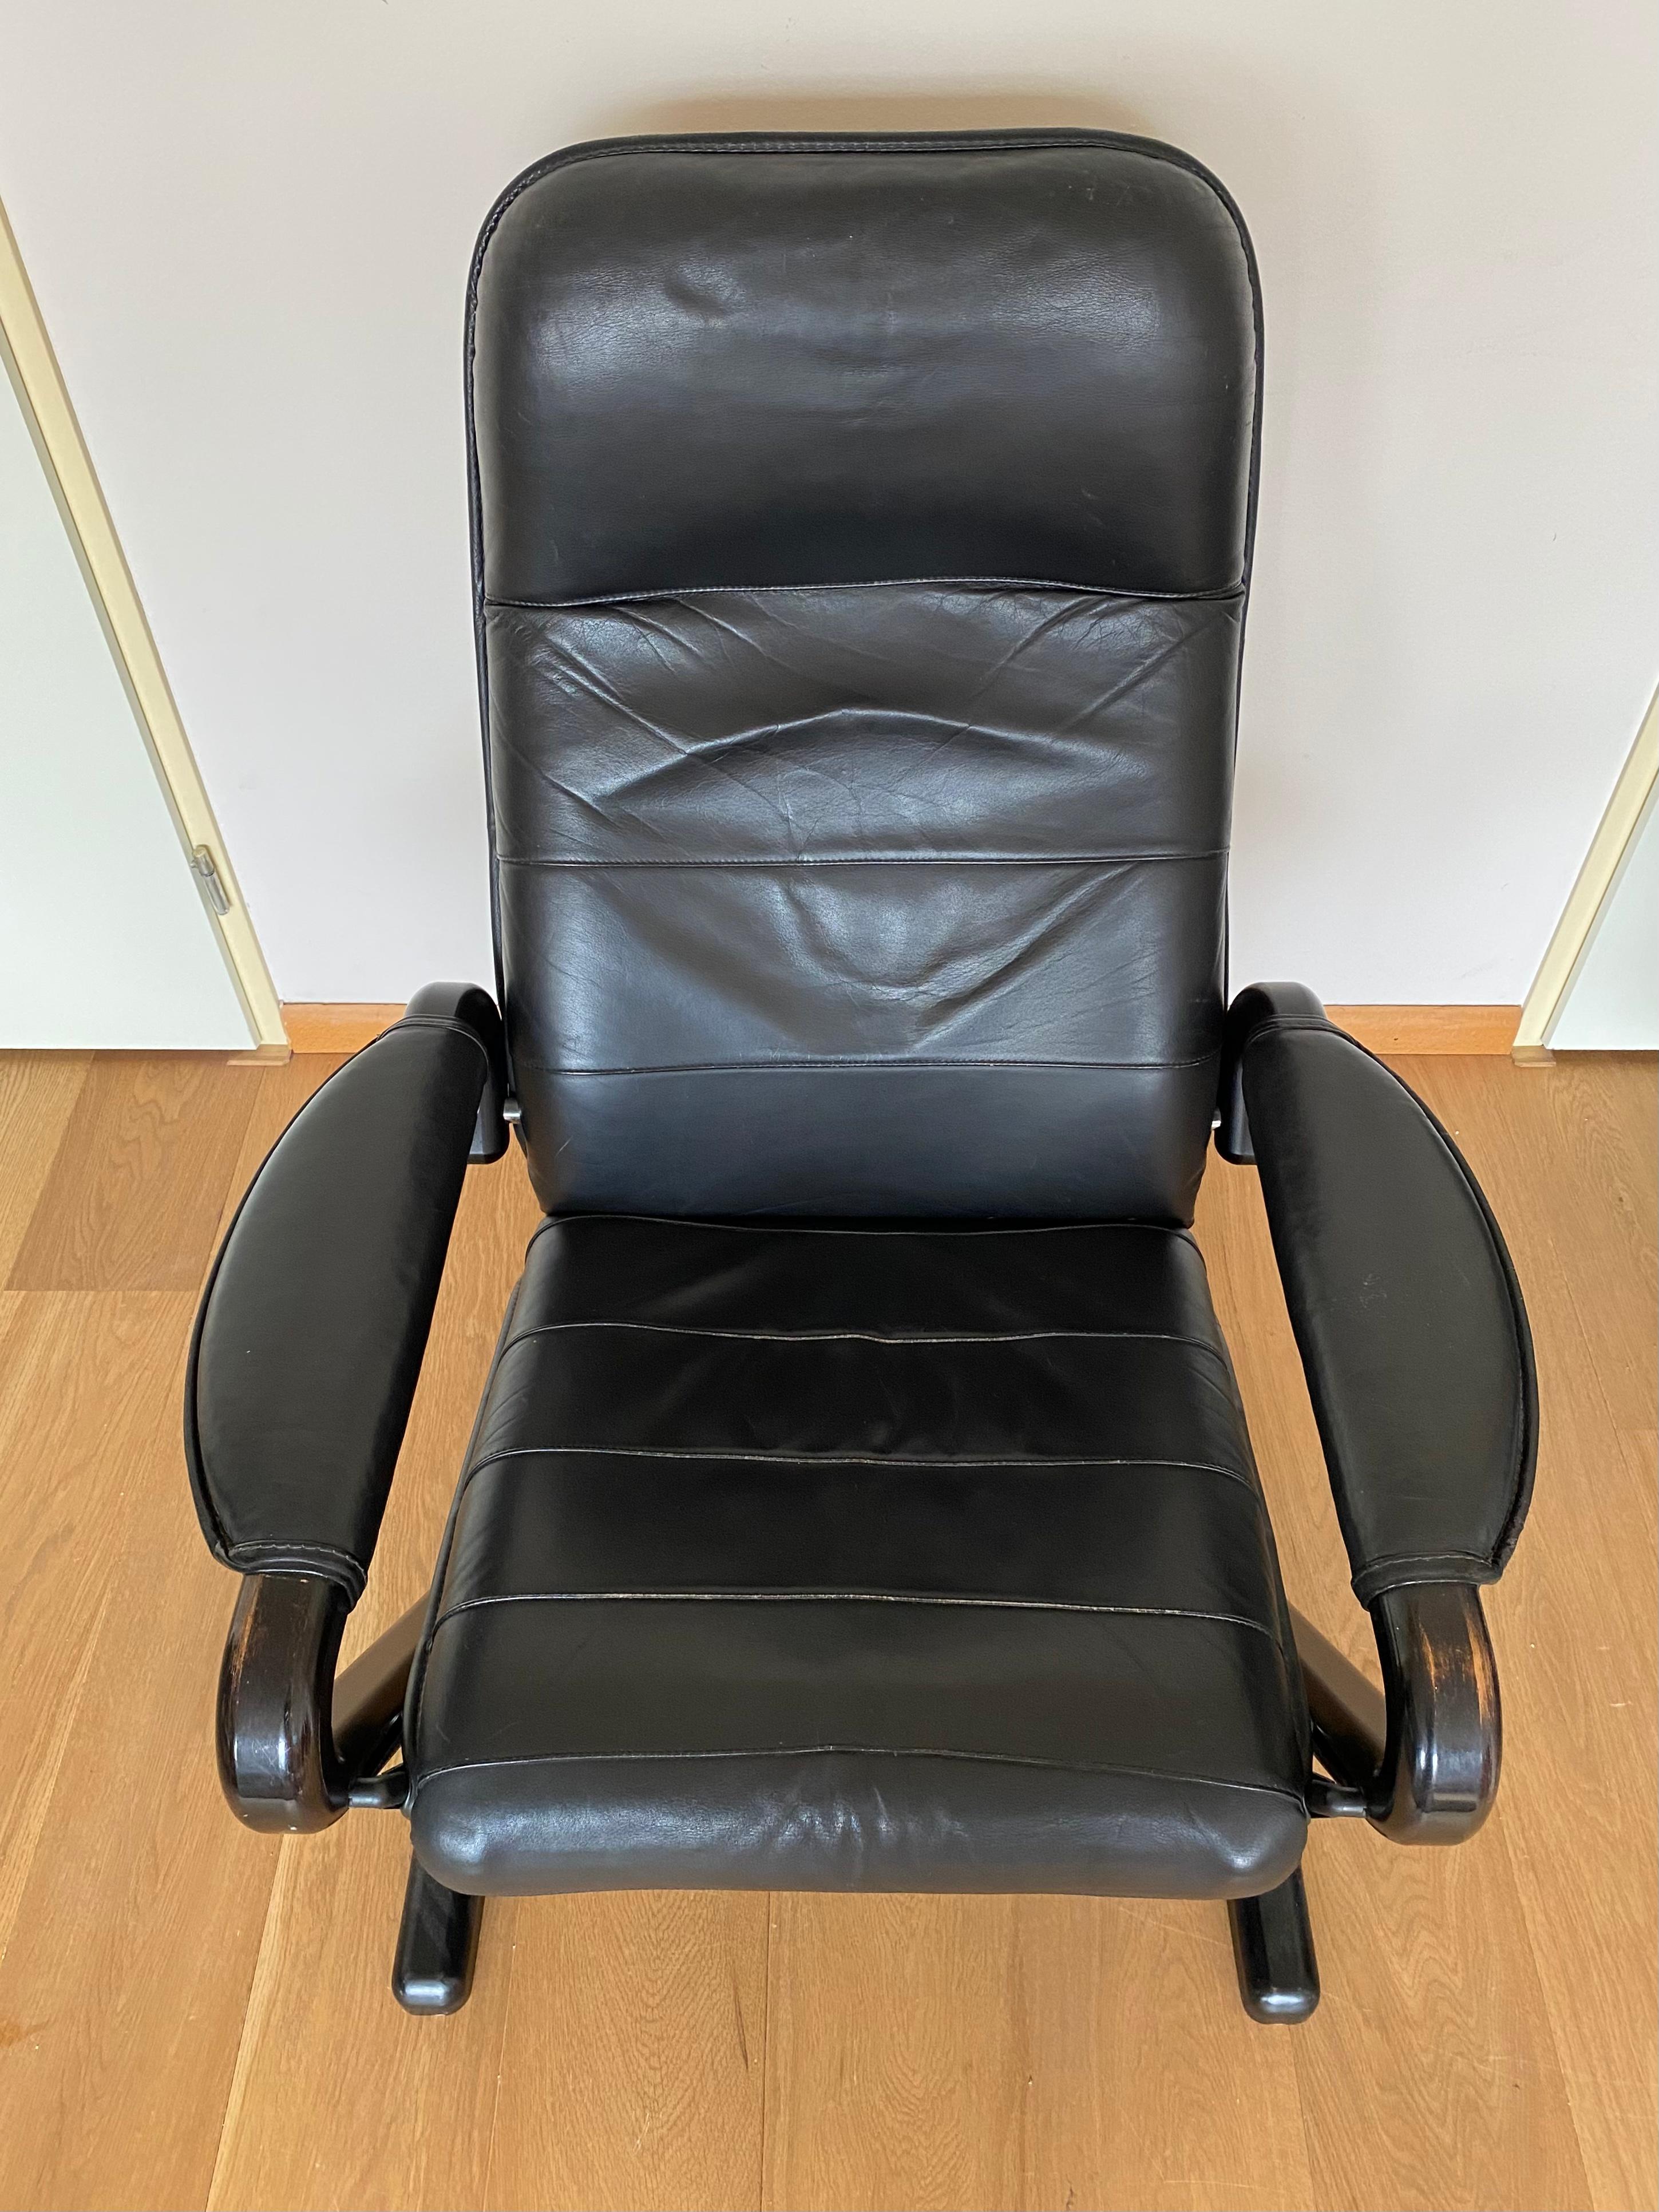 European Black Leather and Bentwood Recliner Chair, ca. 1980s